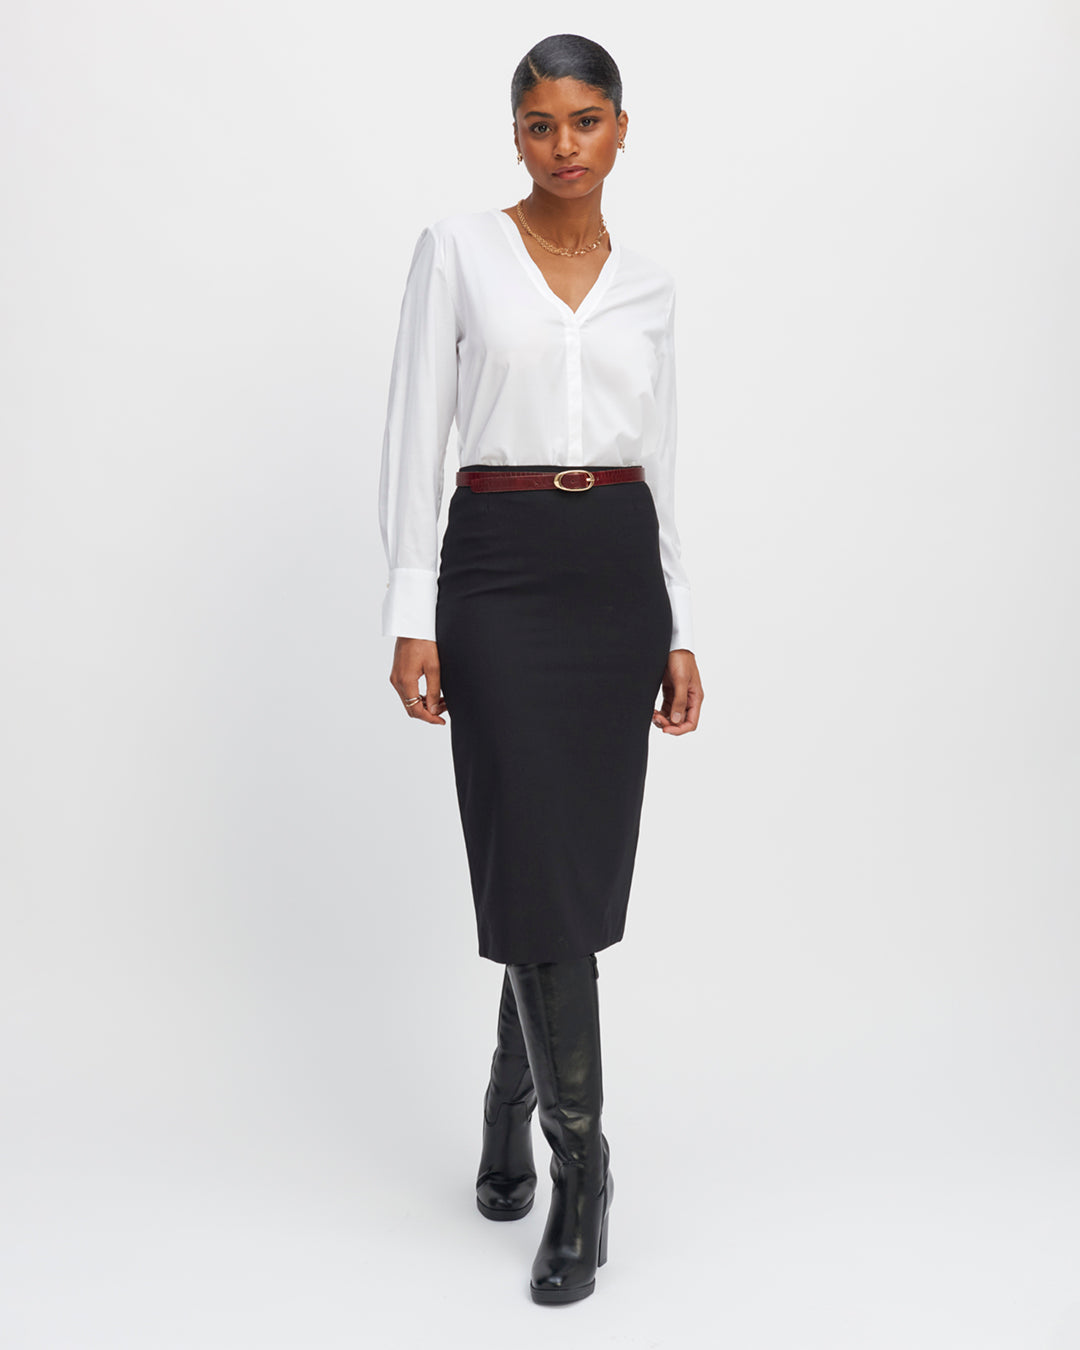 Pencil-skirt-black-High-waist-Wool-from-Italy-Super-100'S-Supple-and-comfortable-Back-slit-Souligne-joliment-the-hips-A-minimum-of-seams-apparentes-17H10-tailors-for-women-paris-